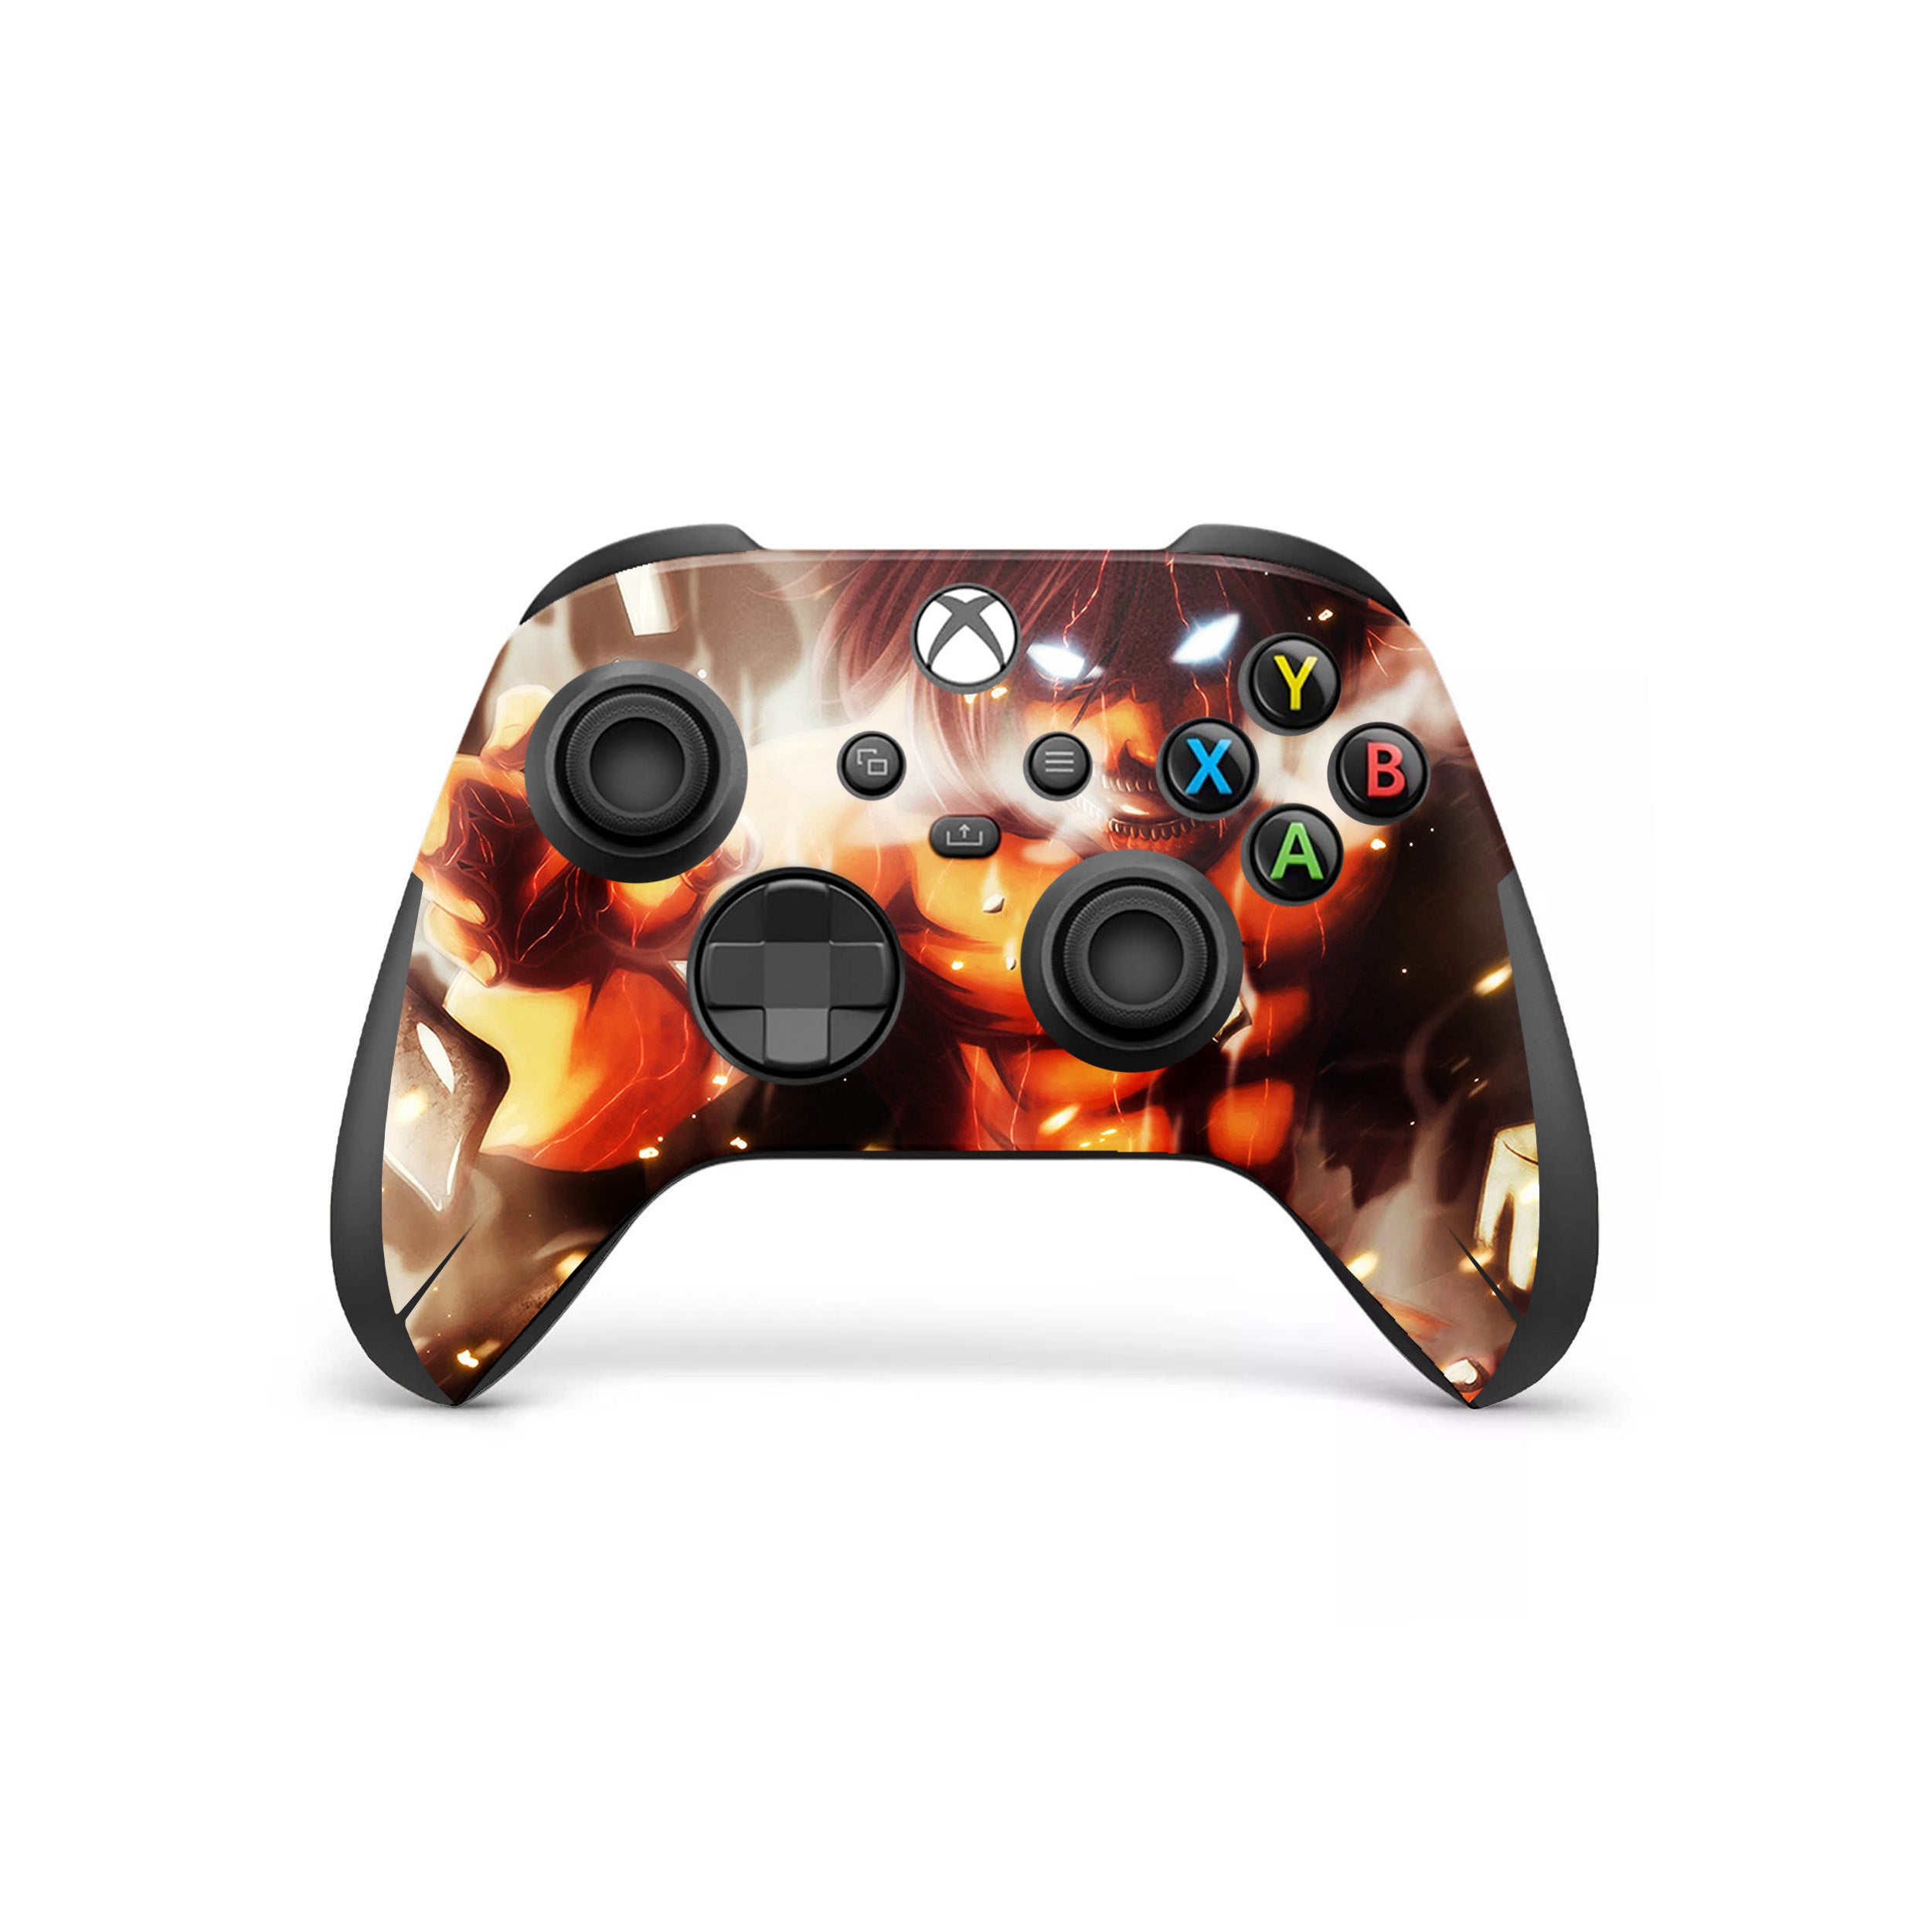 A video game skin featuring a Attack On Titan Eren Yeager design for the Xbox Wireless Controller.